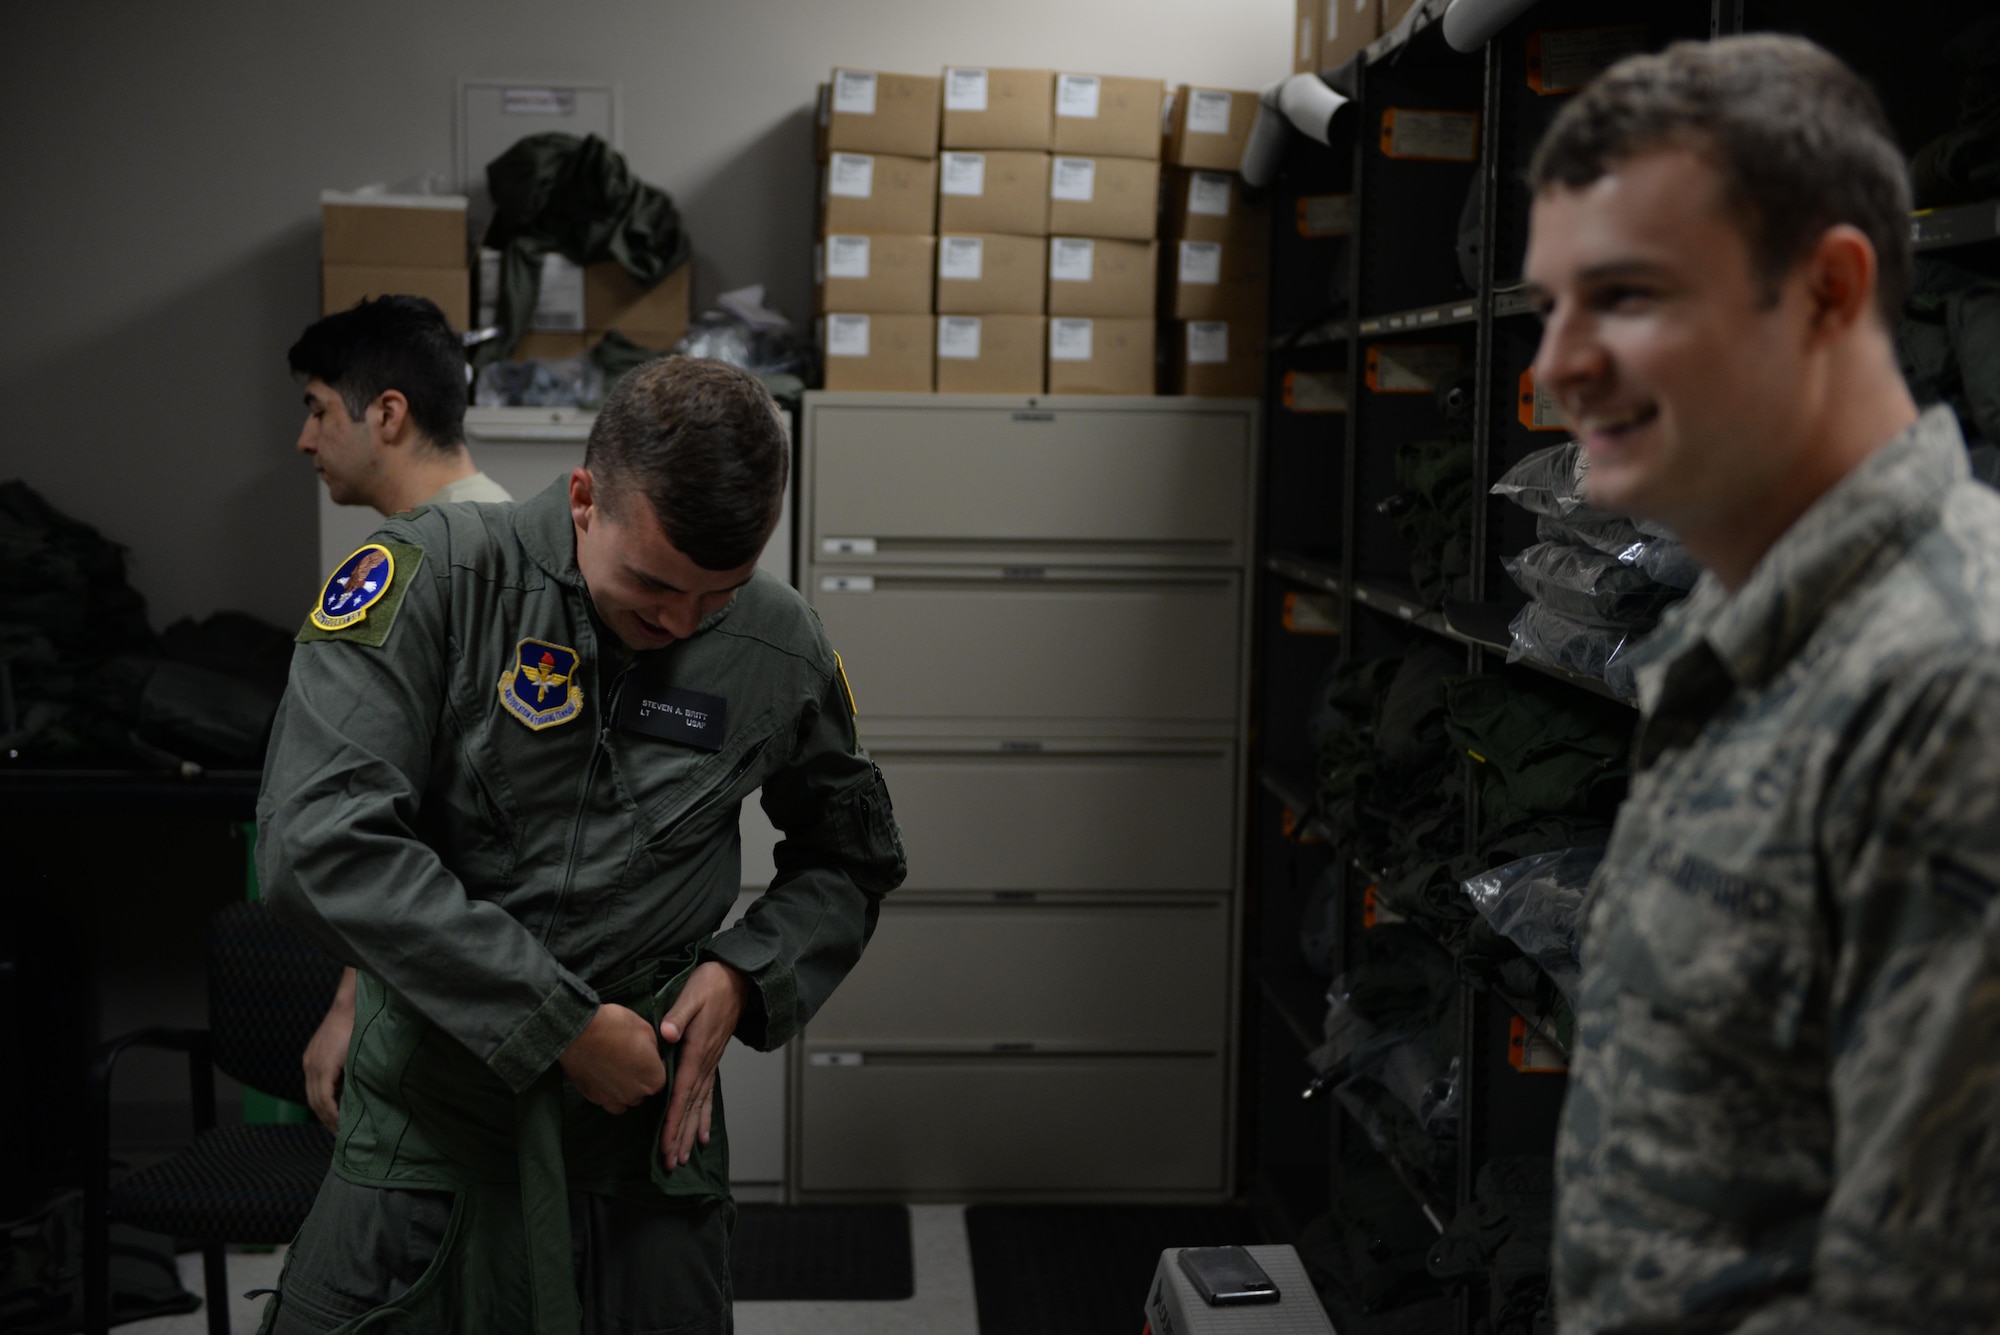 Second Lt. Steven Britt, 37th Flying Training Squadron student pilot, puts on a G-suit at Columbus Air Force Base Miss. Even with 2,600 flying hours and 741 combat hours, the challenge of bringing in students and creating world-class aviators can’t be understood without PIT. (U.S. Air Force photo by Airman 1st Class Davis Donaldson)